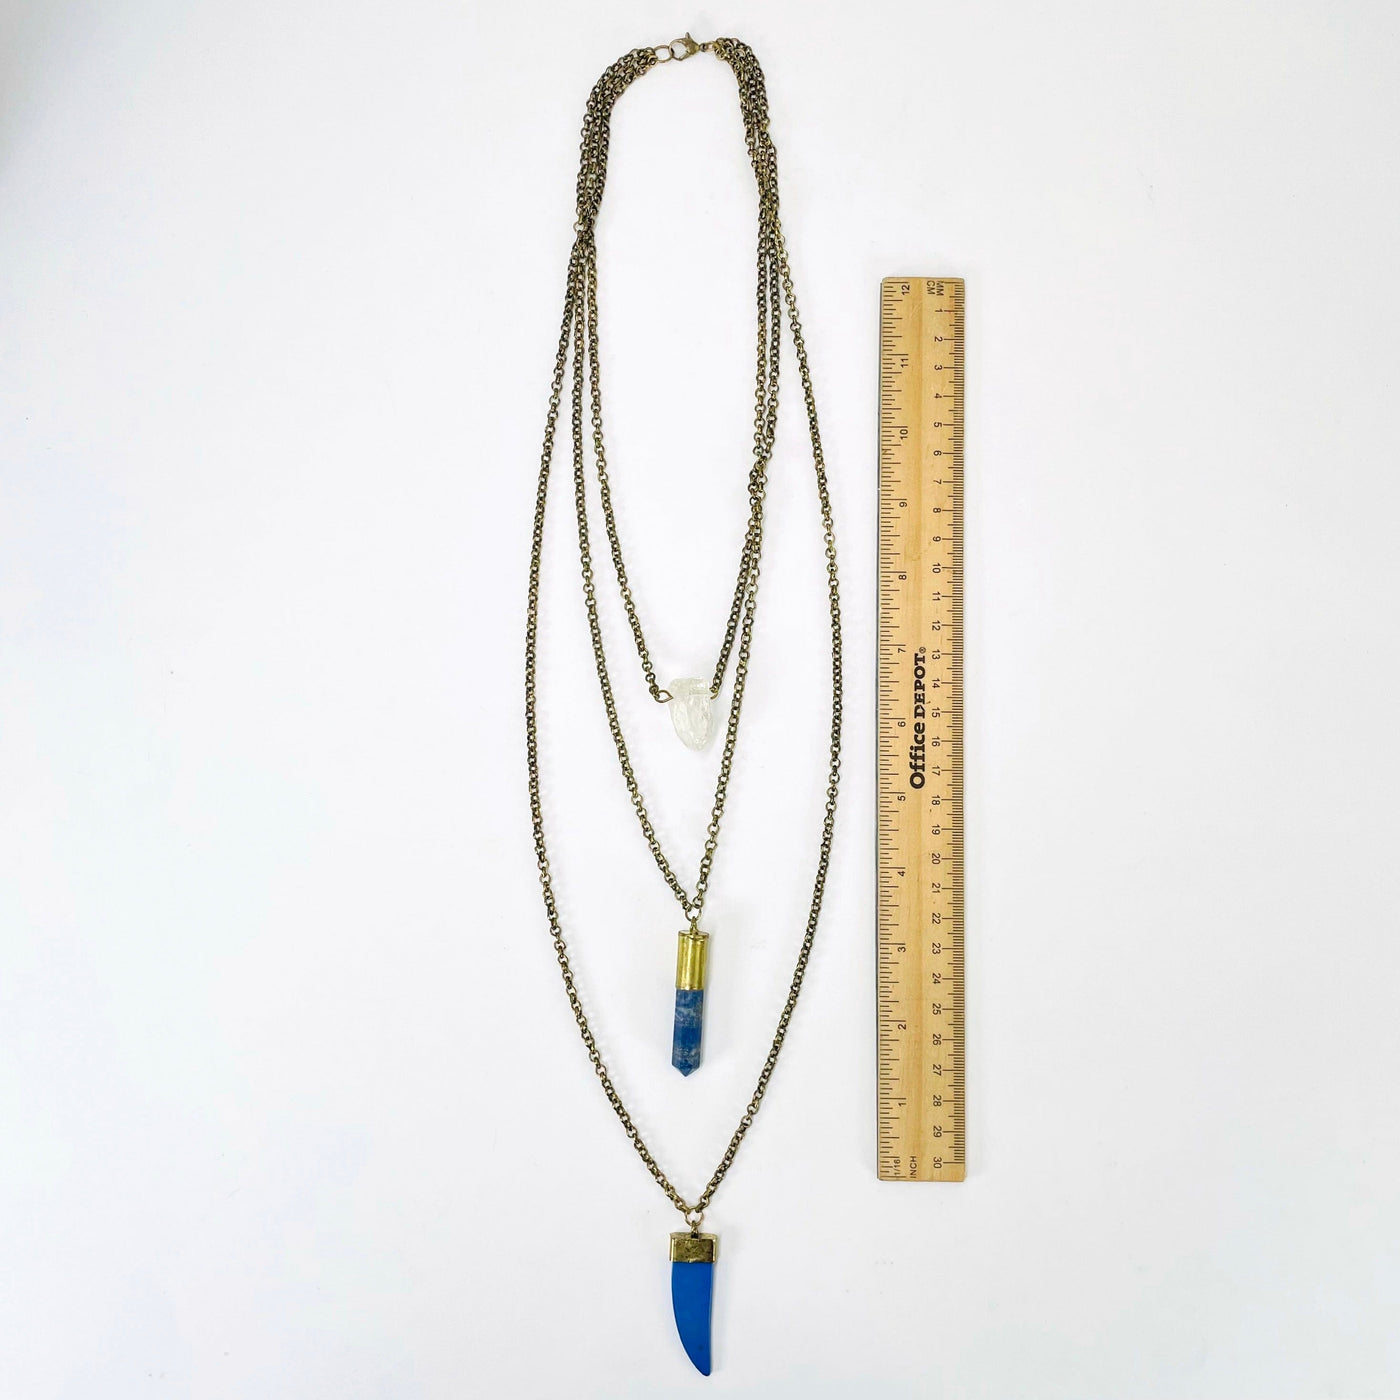 full necklace length on white background with a ruler for length reference